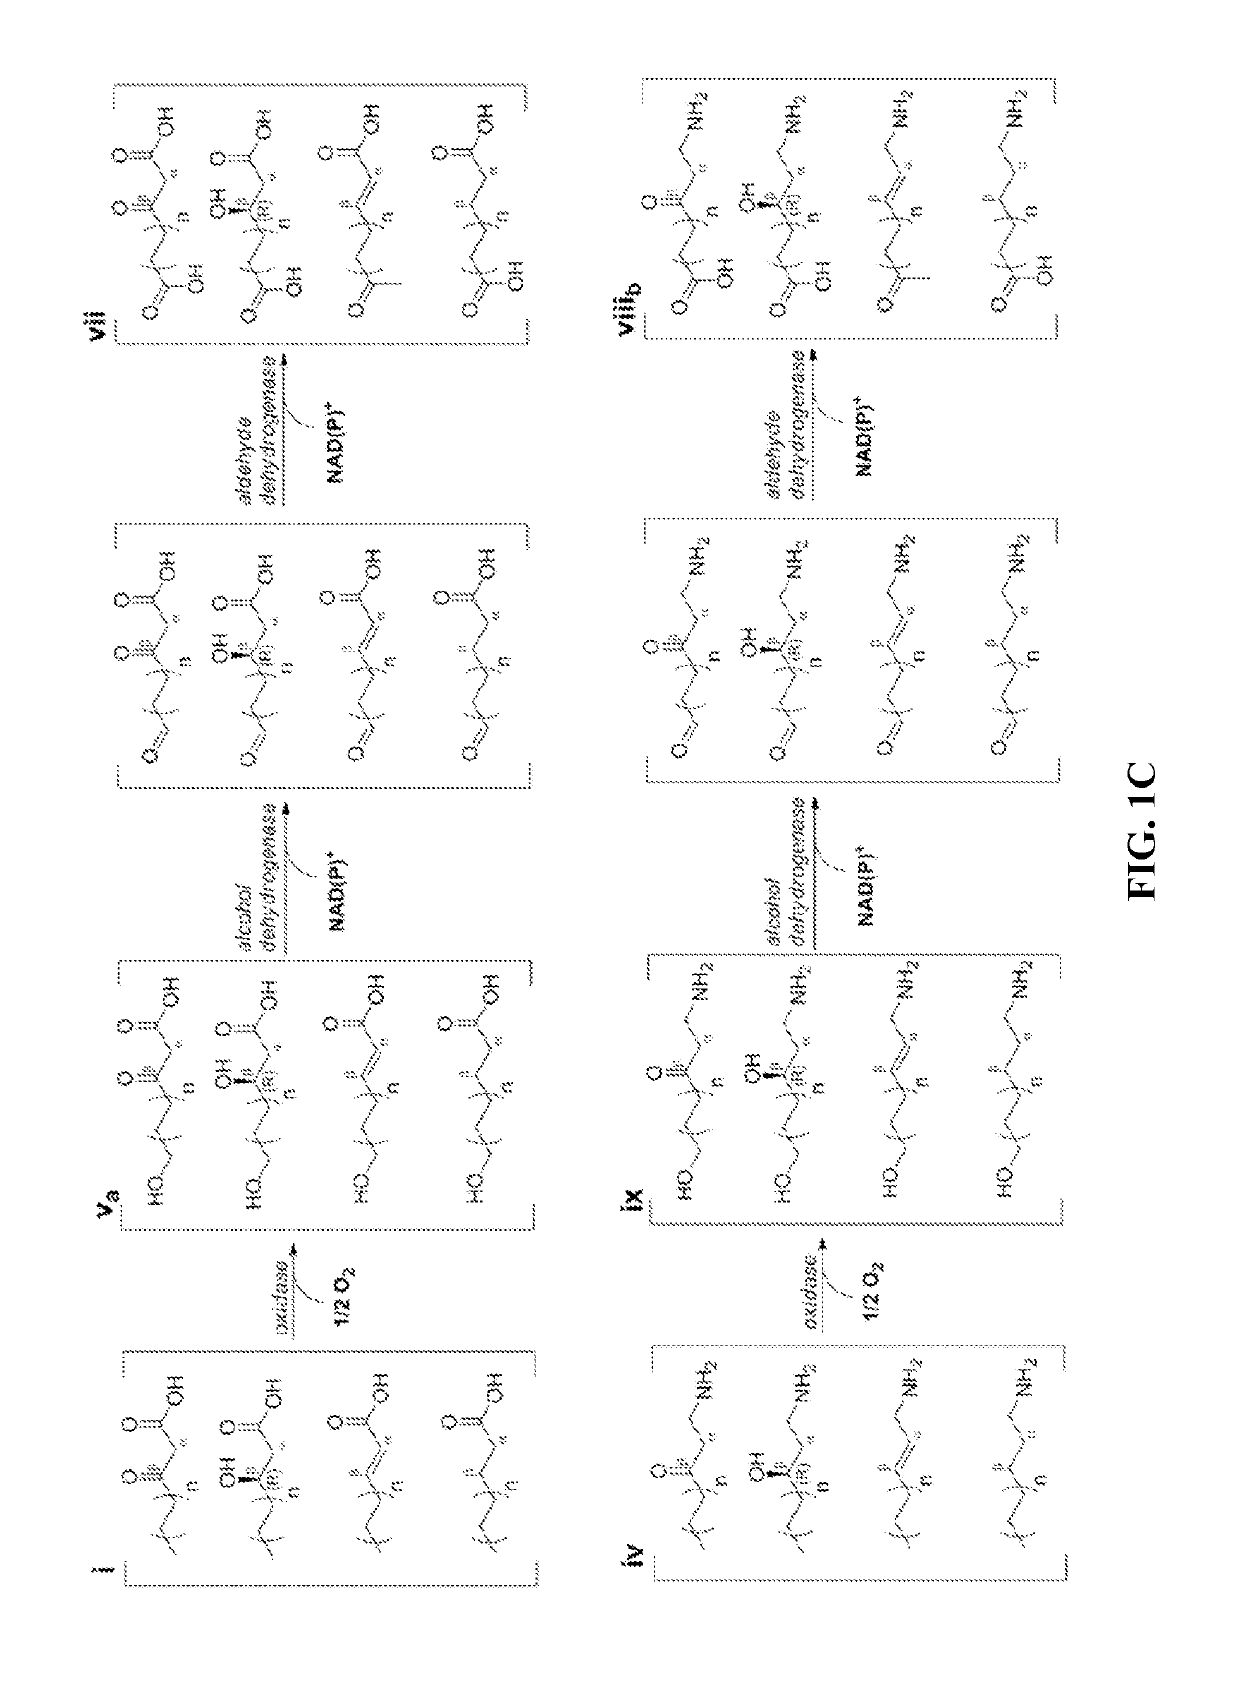 Type II fatty acid synthesis enzymes in reverse β-oxidation